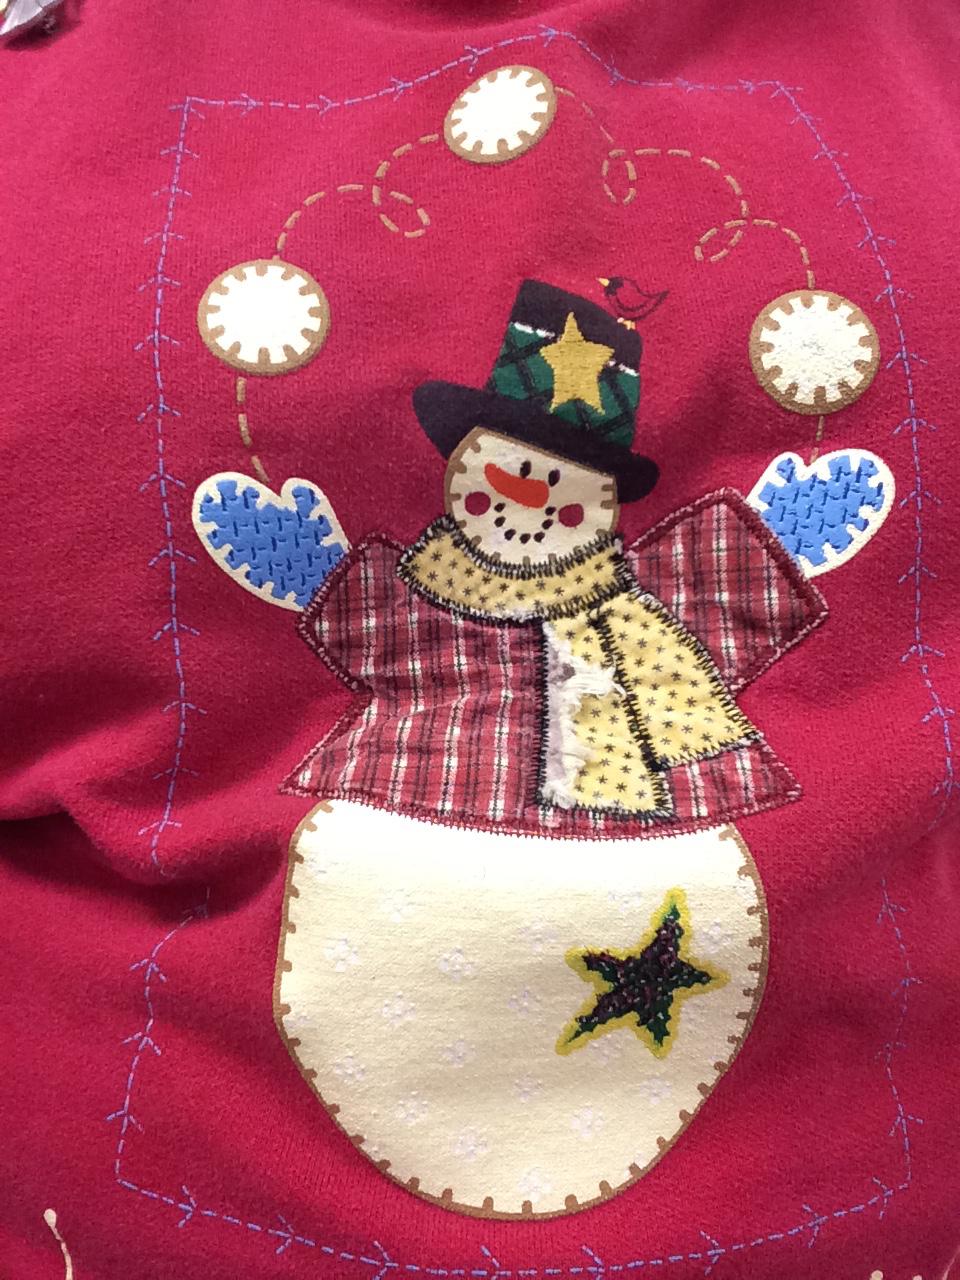 5 th GRADE HUMANITIES ASSIGNMENT EXAMPLE: Where Is the Snow? It seems as if I see snowmen everywhere I look. Today I saw snowmen on my aunt's shirt, on a poster at Walmart, and even on a cereal box.